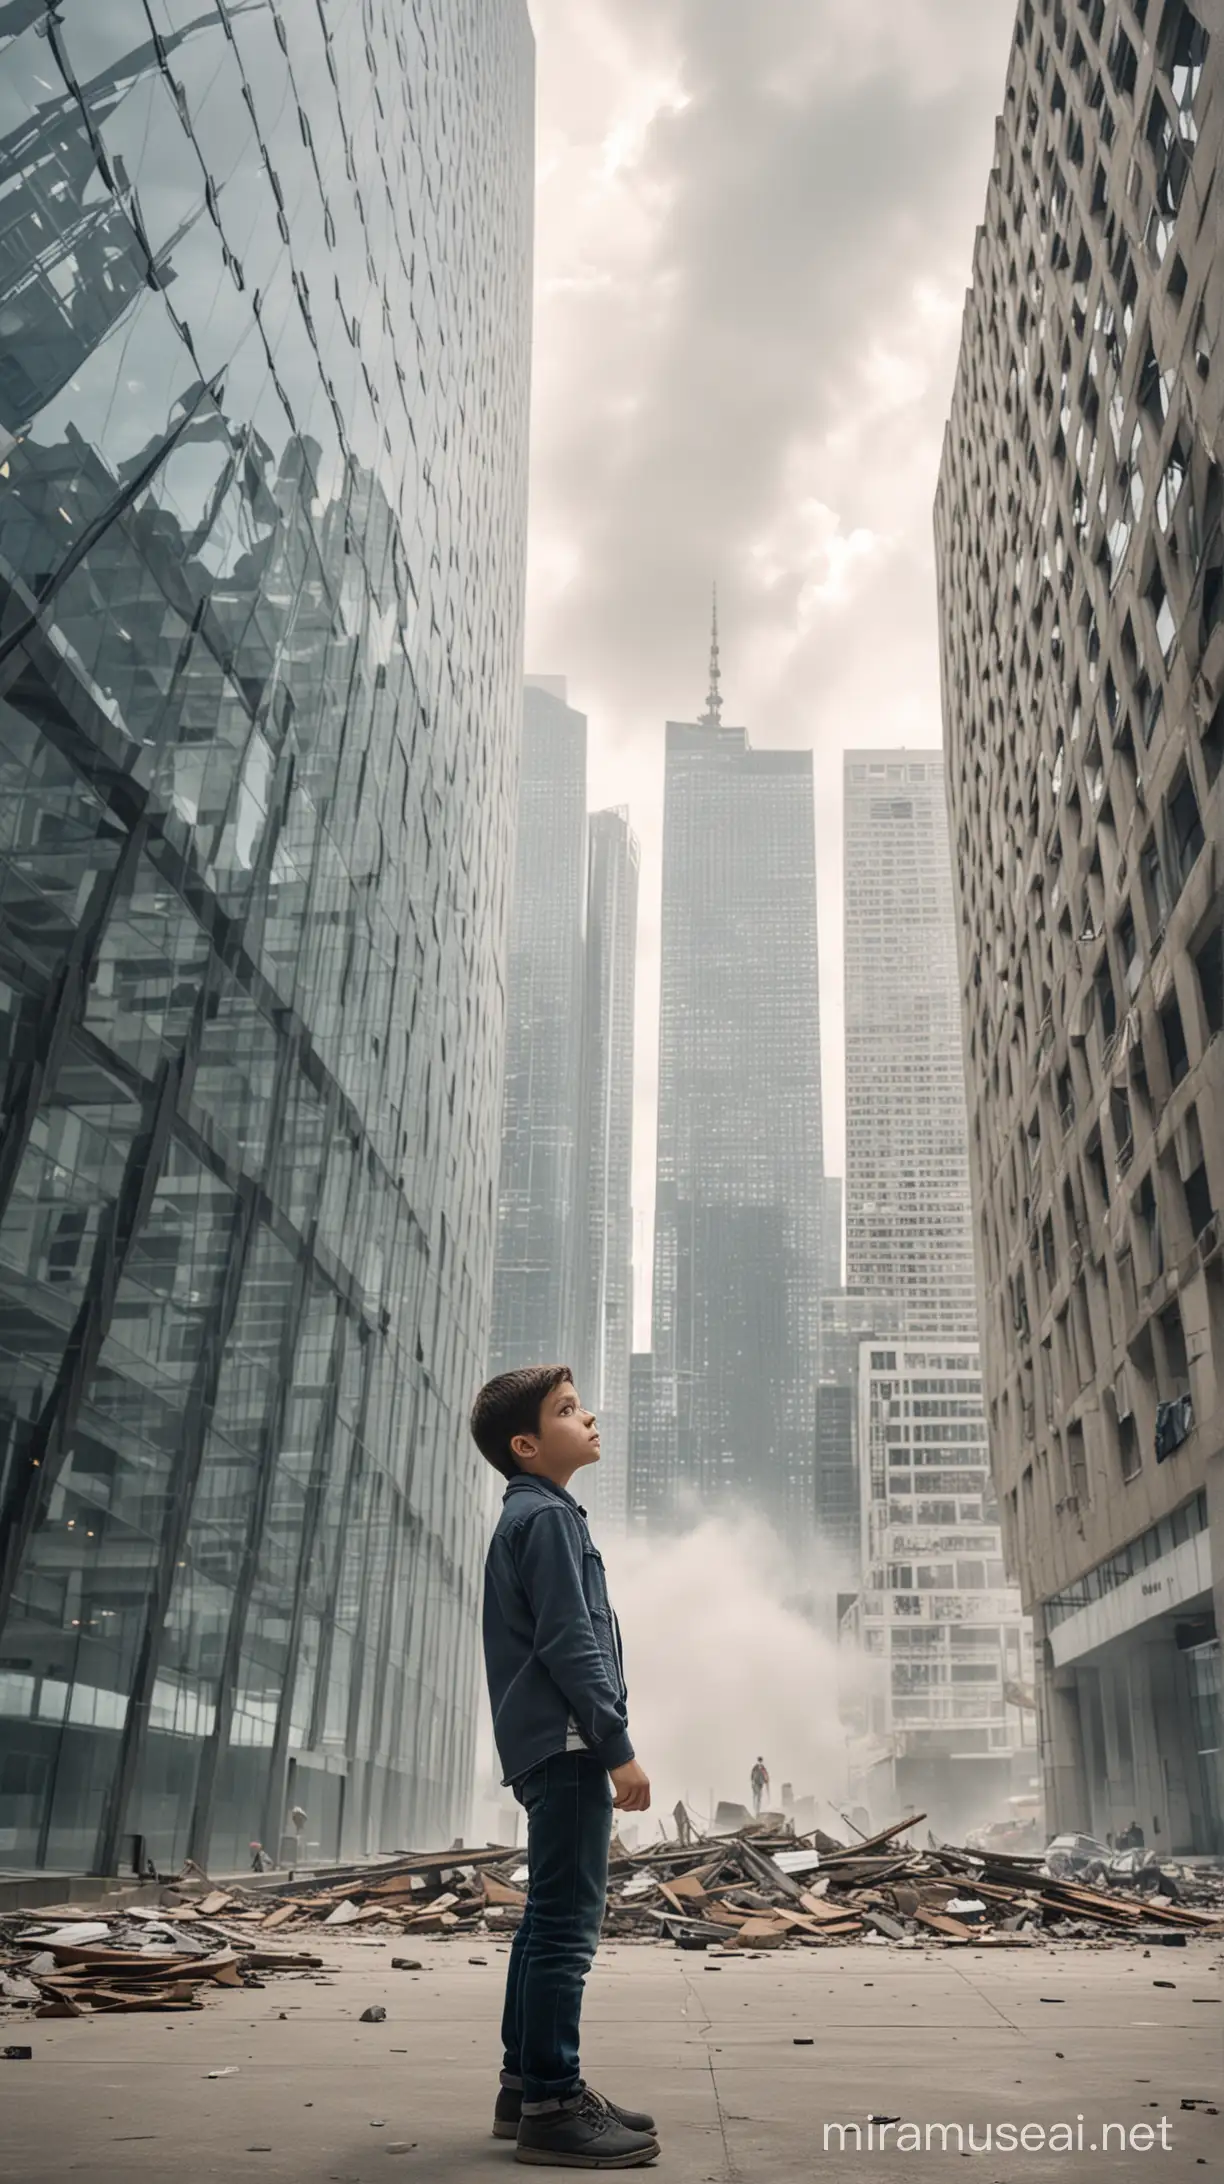 Generate an image depicting a scene where a determined young boy is standing on the ground and looking upwards towards his dream company named "Technovated". The boy is gazing at the towering office building, which is located on the 15th floor of a skyscraper. The building should be depicted in the distance, with the boy positioned in the foreground, symbolizing his aspiration and ambition to join the company someday. The boy's expression should convey a sense of determination and hope as he stares at the building, visualizing his future success and opportunities within "Technovated".